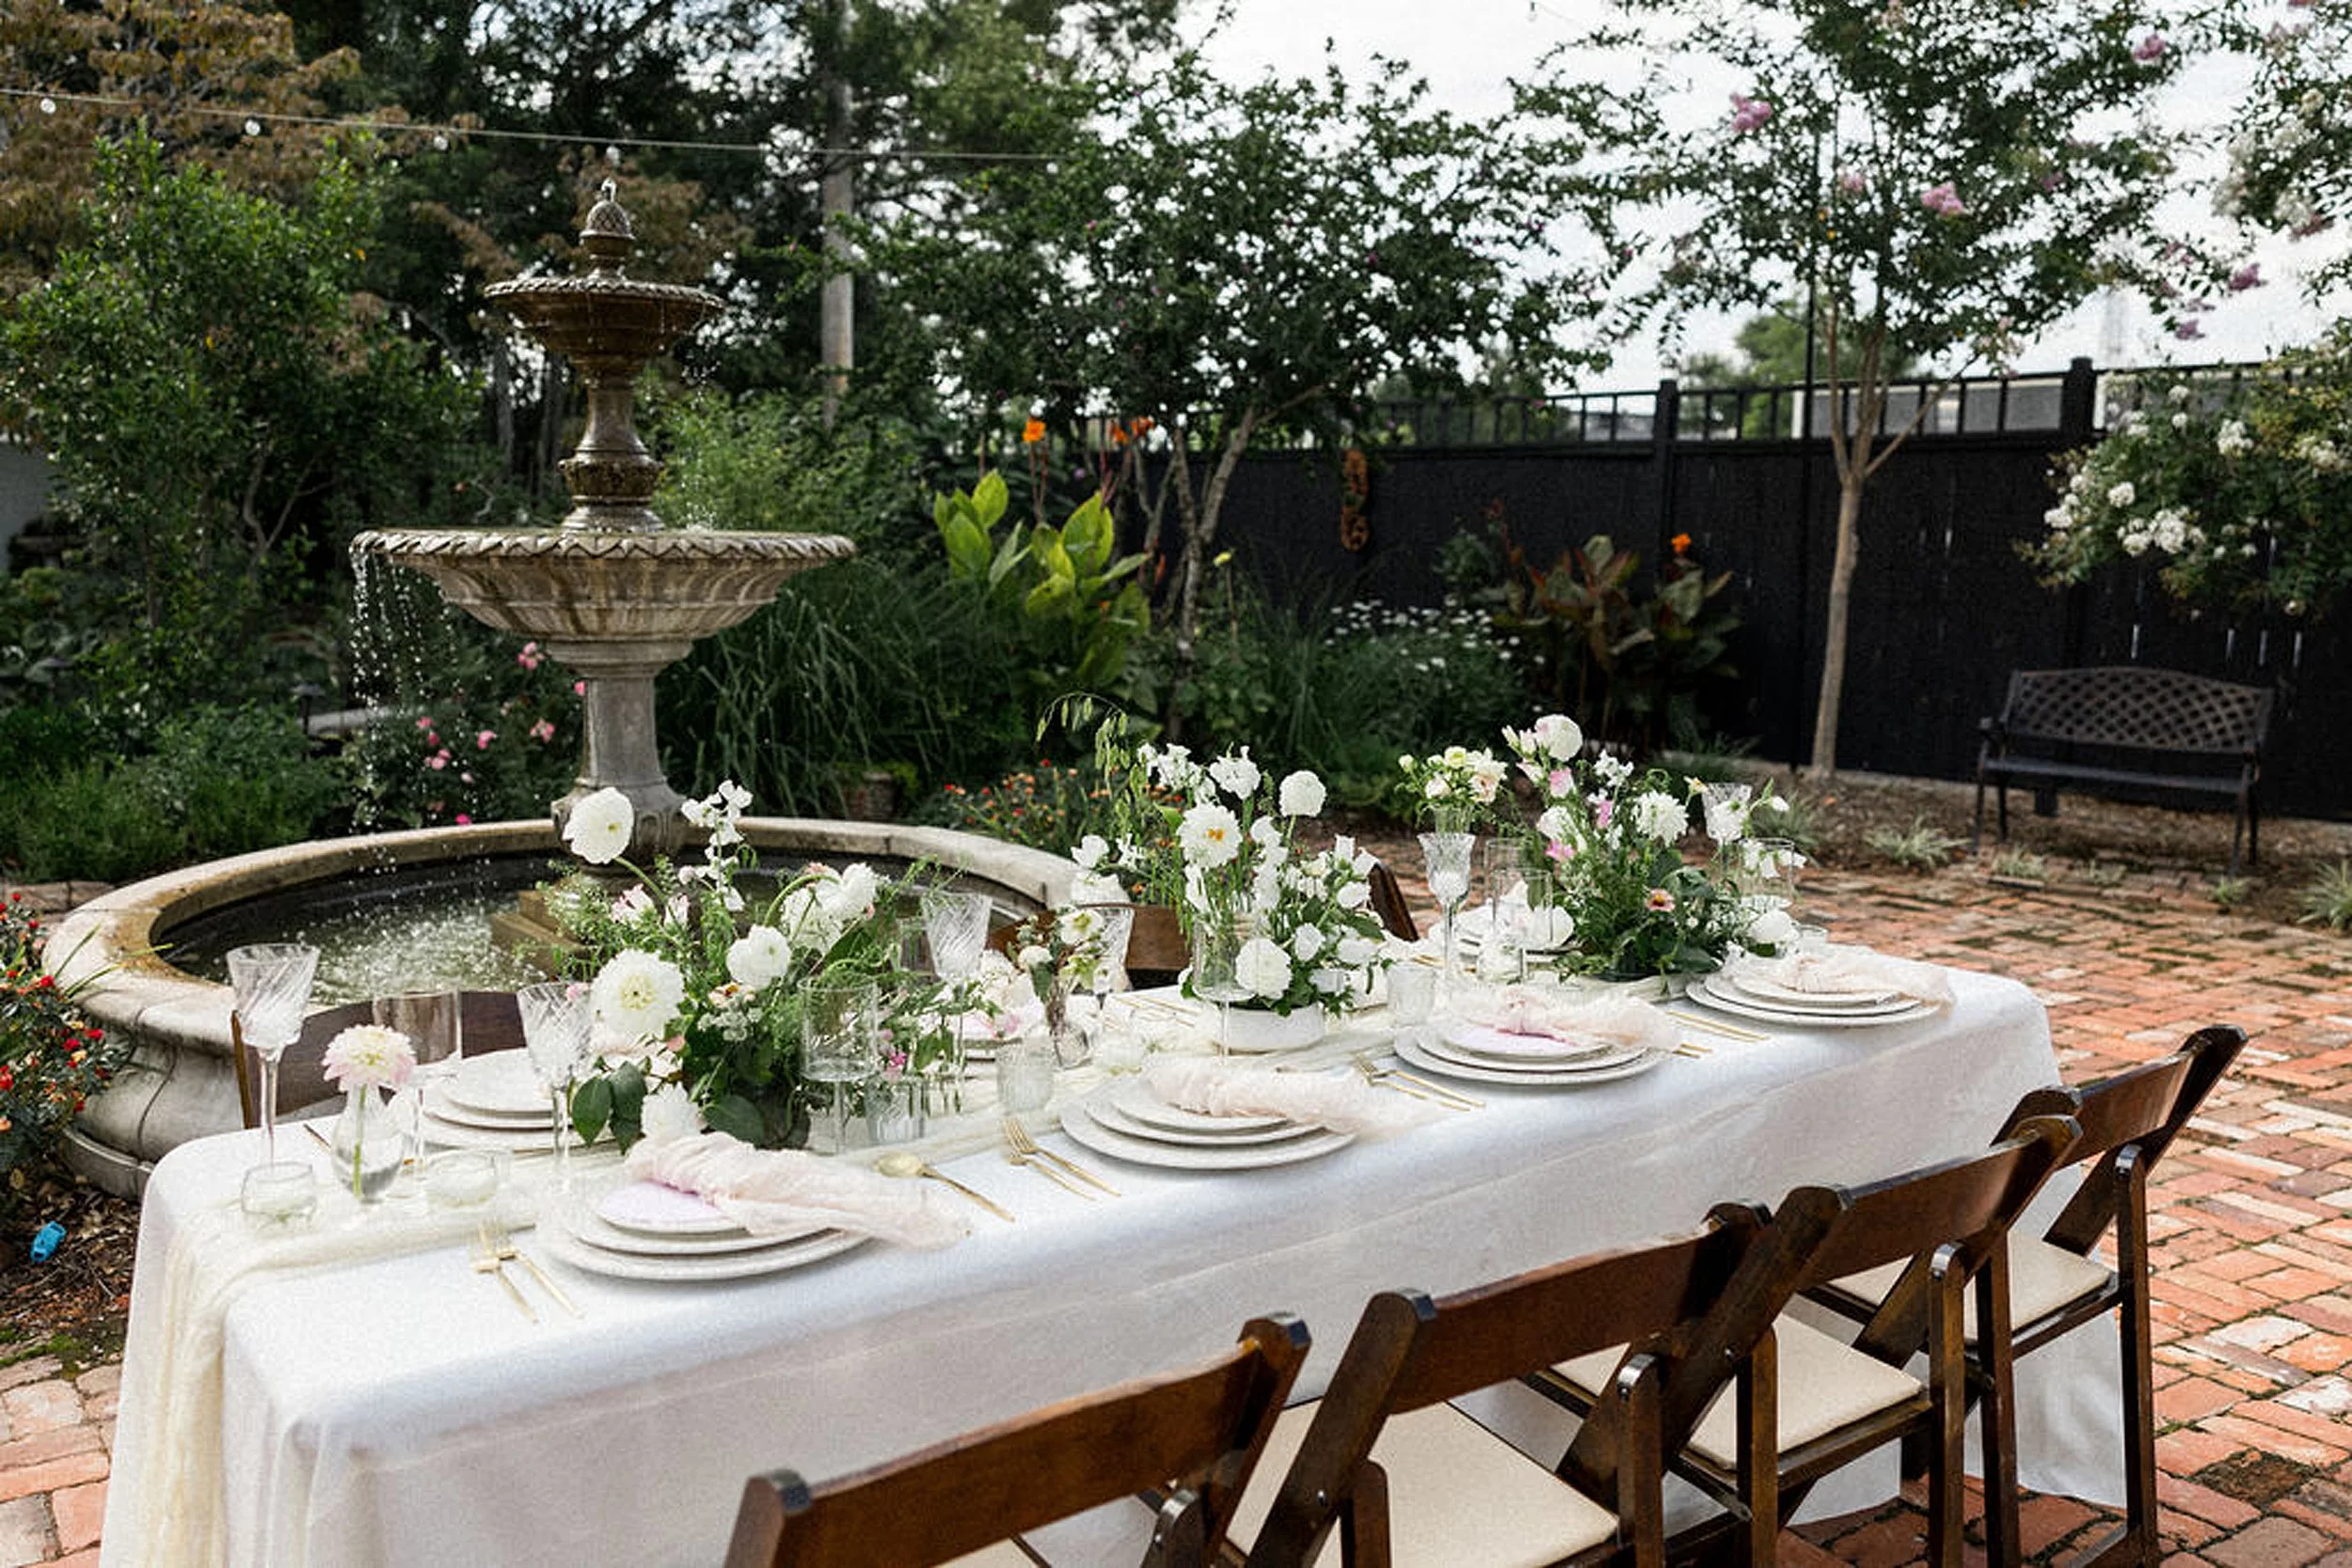 Details of an outdoor wedding reception table setup with wooden chairs and white florals by the fountain on a brick path through the lillian gardens wedding venue